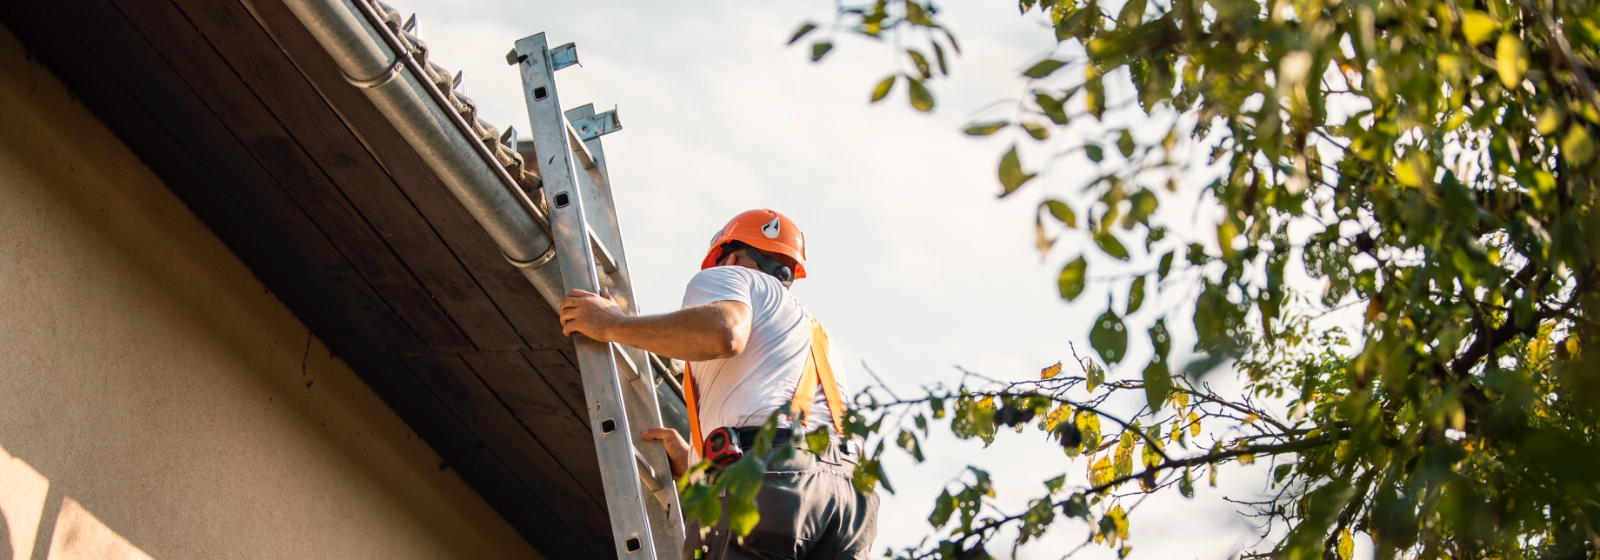 A roofer wearing a white shirt and orange hard hat climbs a ladder as part of the roofing process.